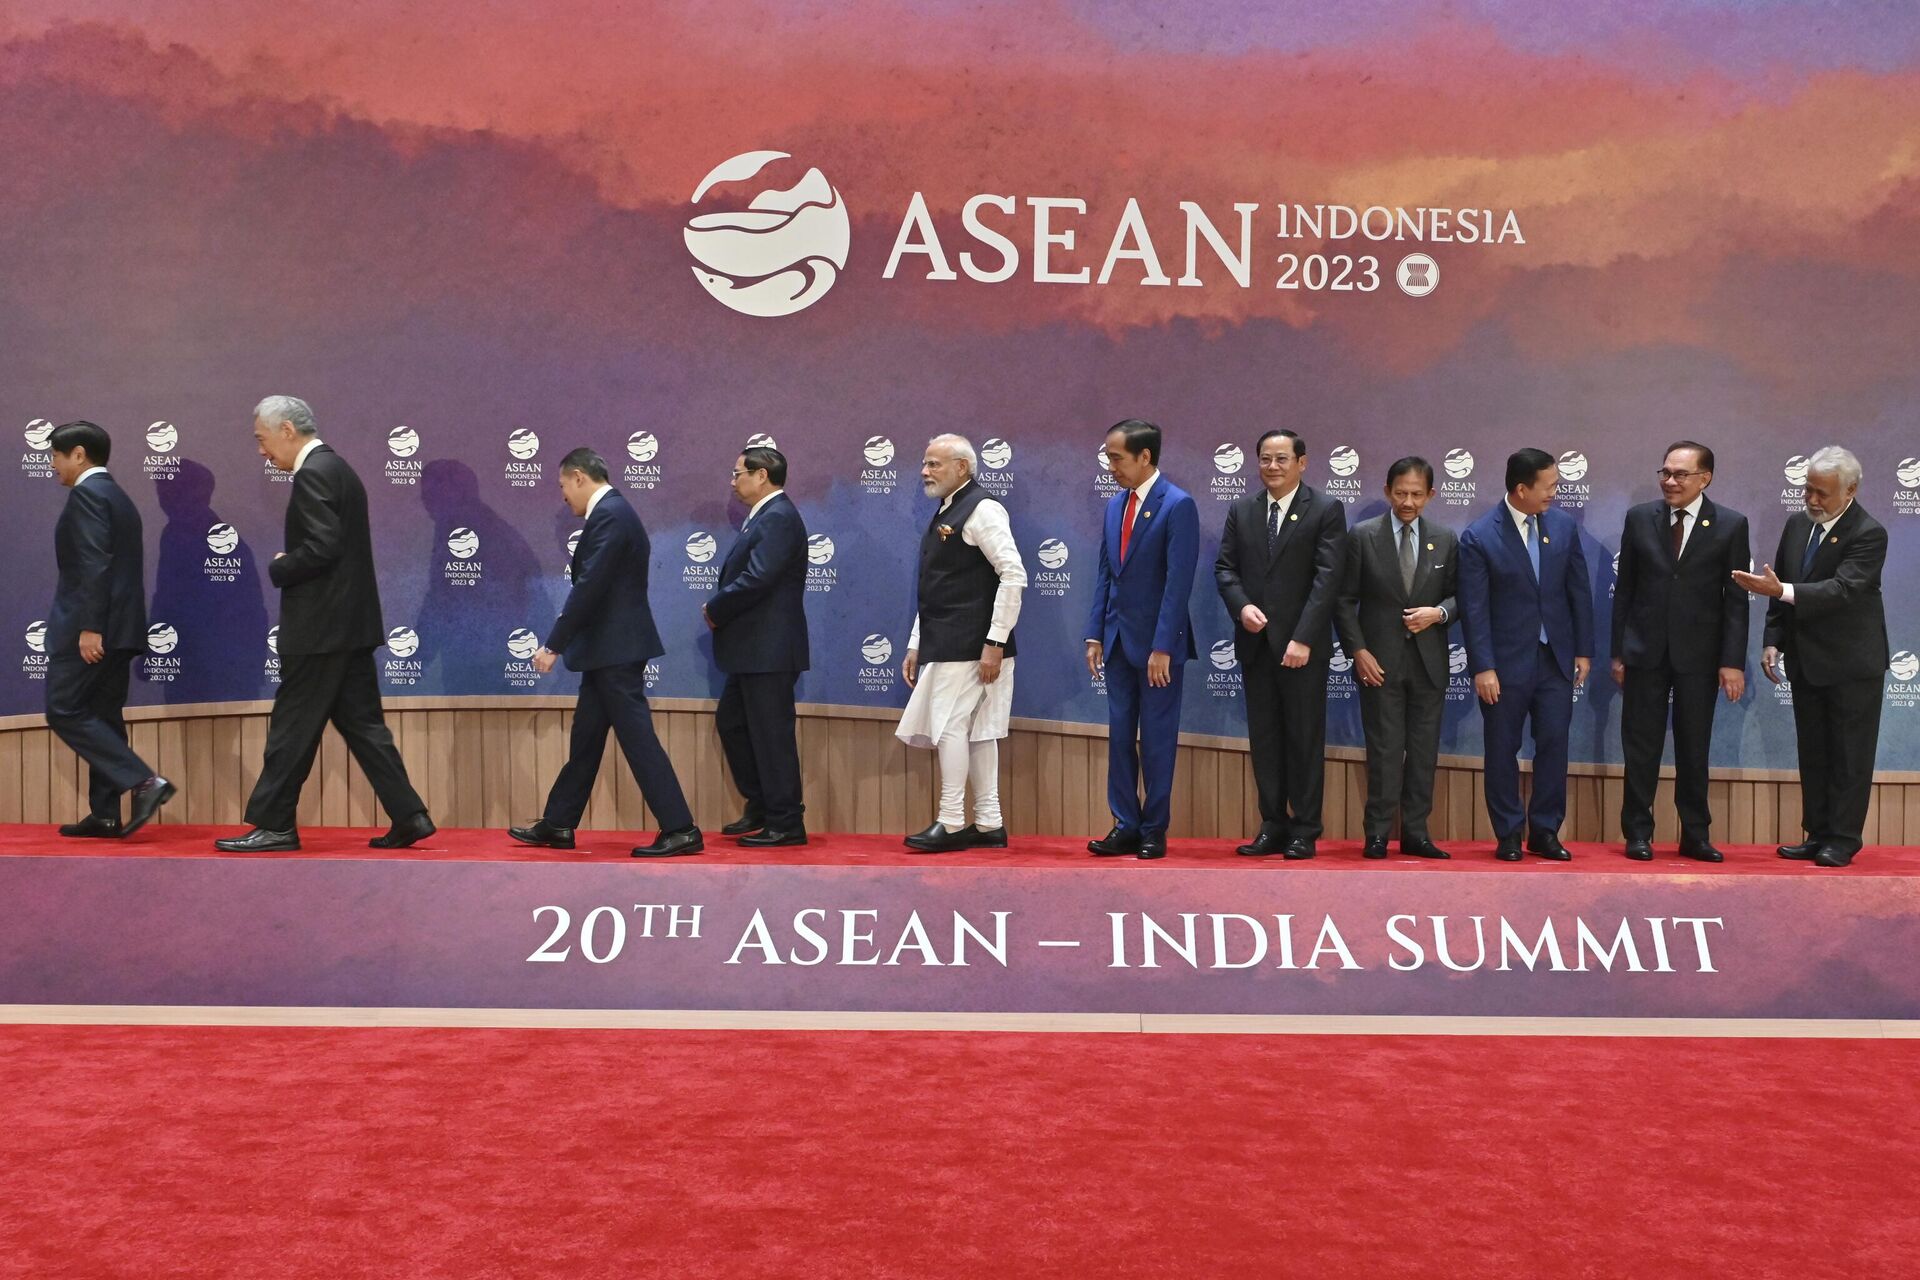 Leaders and delegate members attend the 20th ASEAN-India Summit in Jakarta, Indonesia, Sept. 6, 2023. - Sputnik India, 1920, 10.09.2023